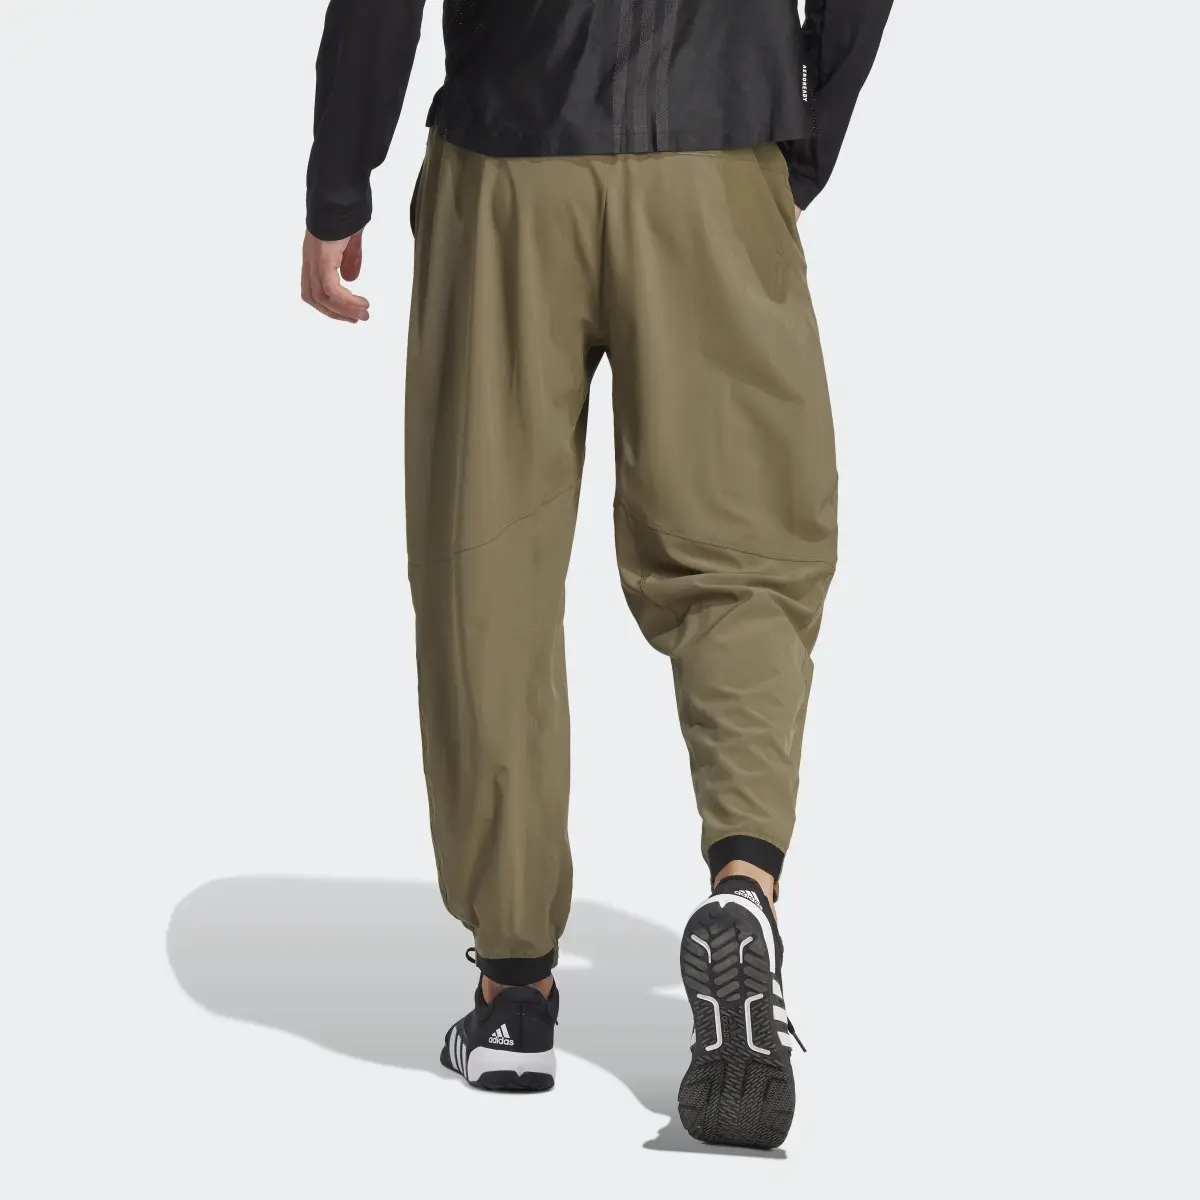 Adidas Designed for Training Pro Series Strength Joggers. 3